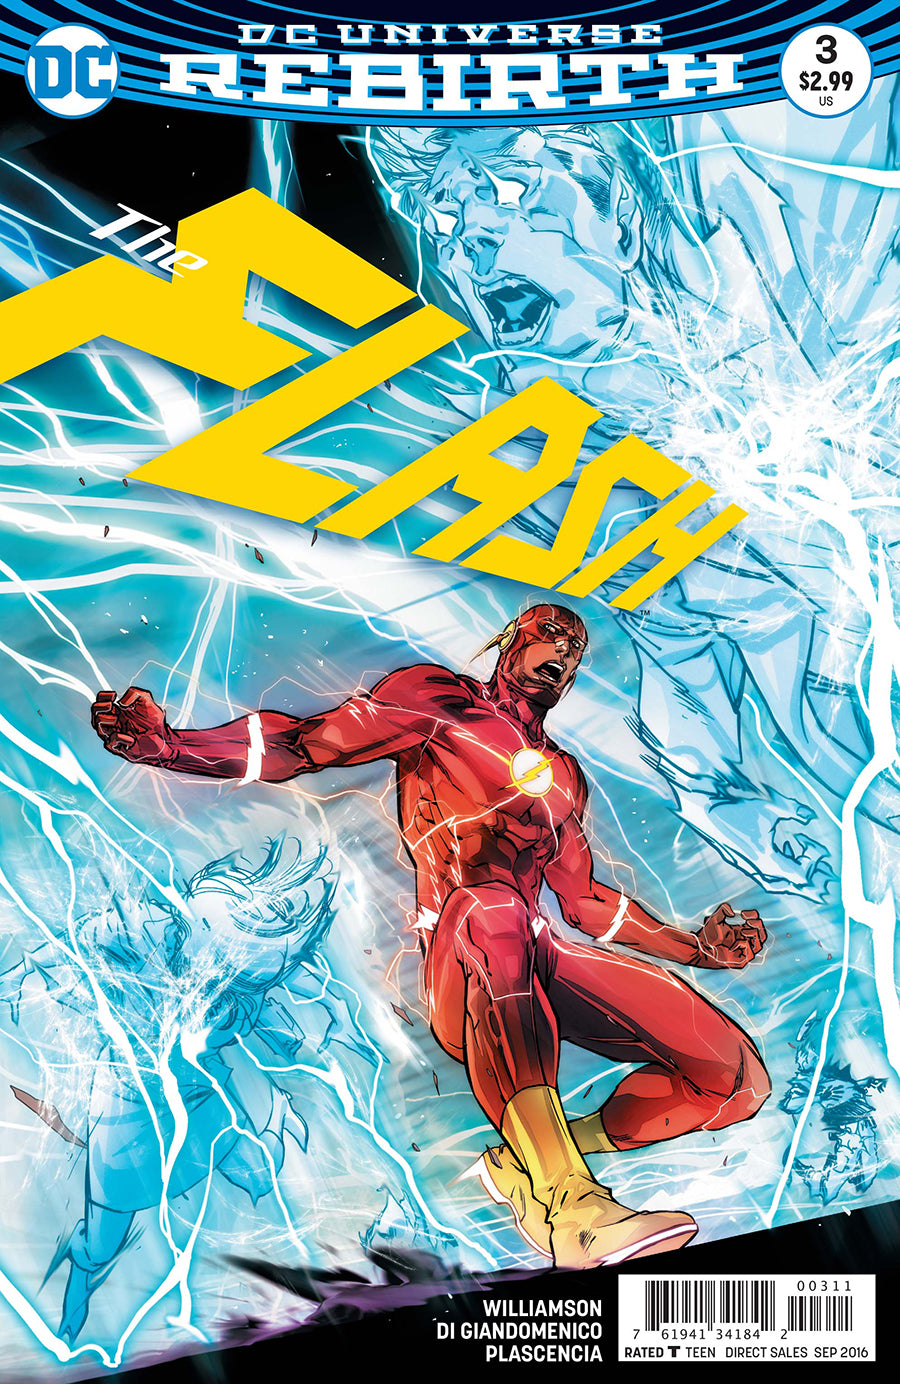 Photo of Flash Issue 3 comic sold by Stronghold Collectibles